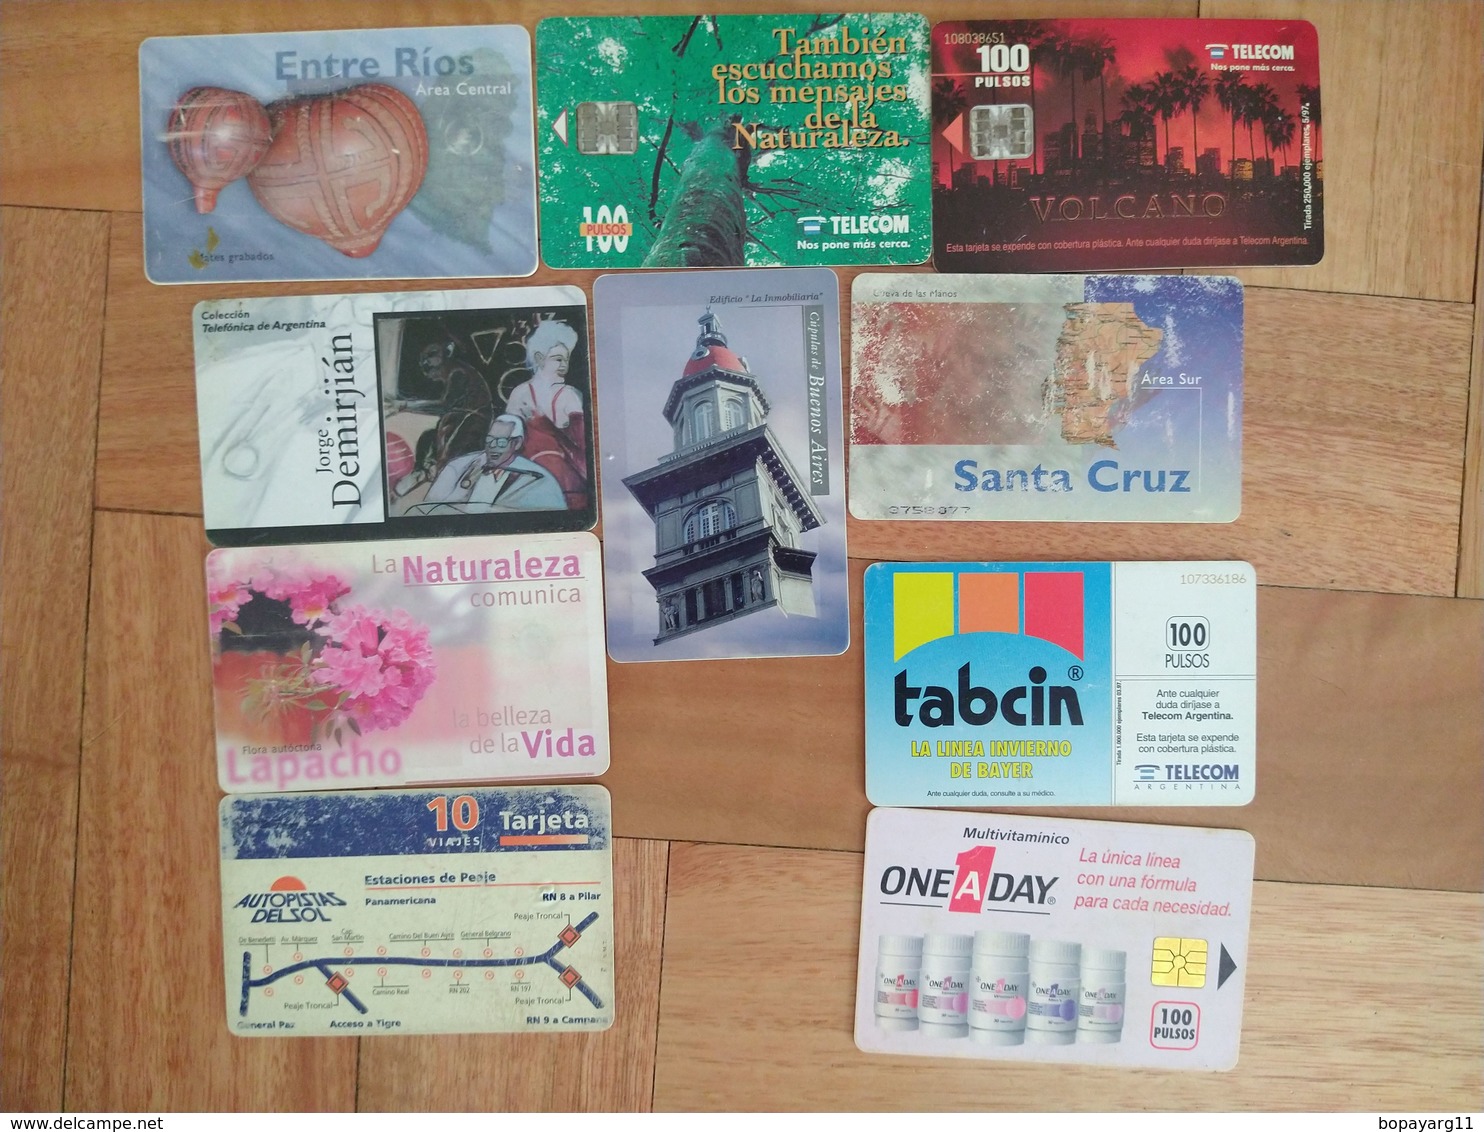 Argentina Phonecards Telecom Telefonica LOT OF 10 FREE WORLDWIDE SHIPPING#11 - Lots - Collections